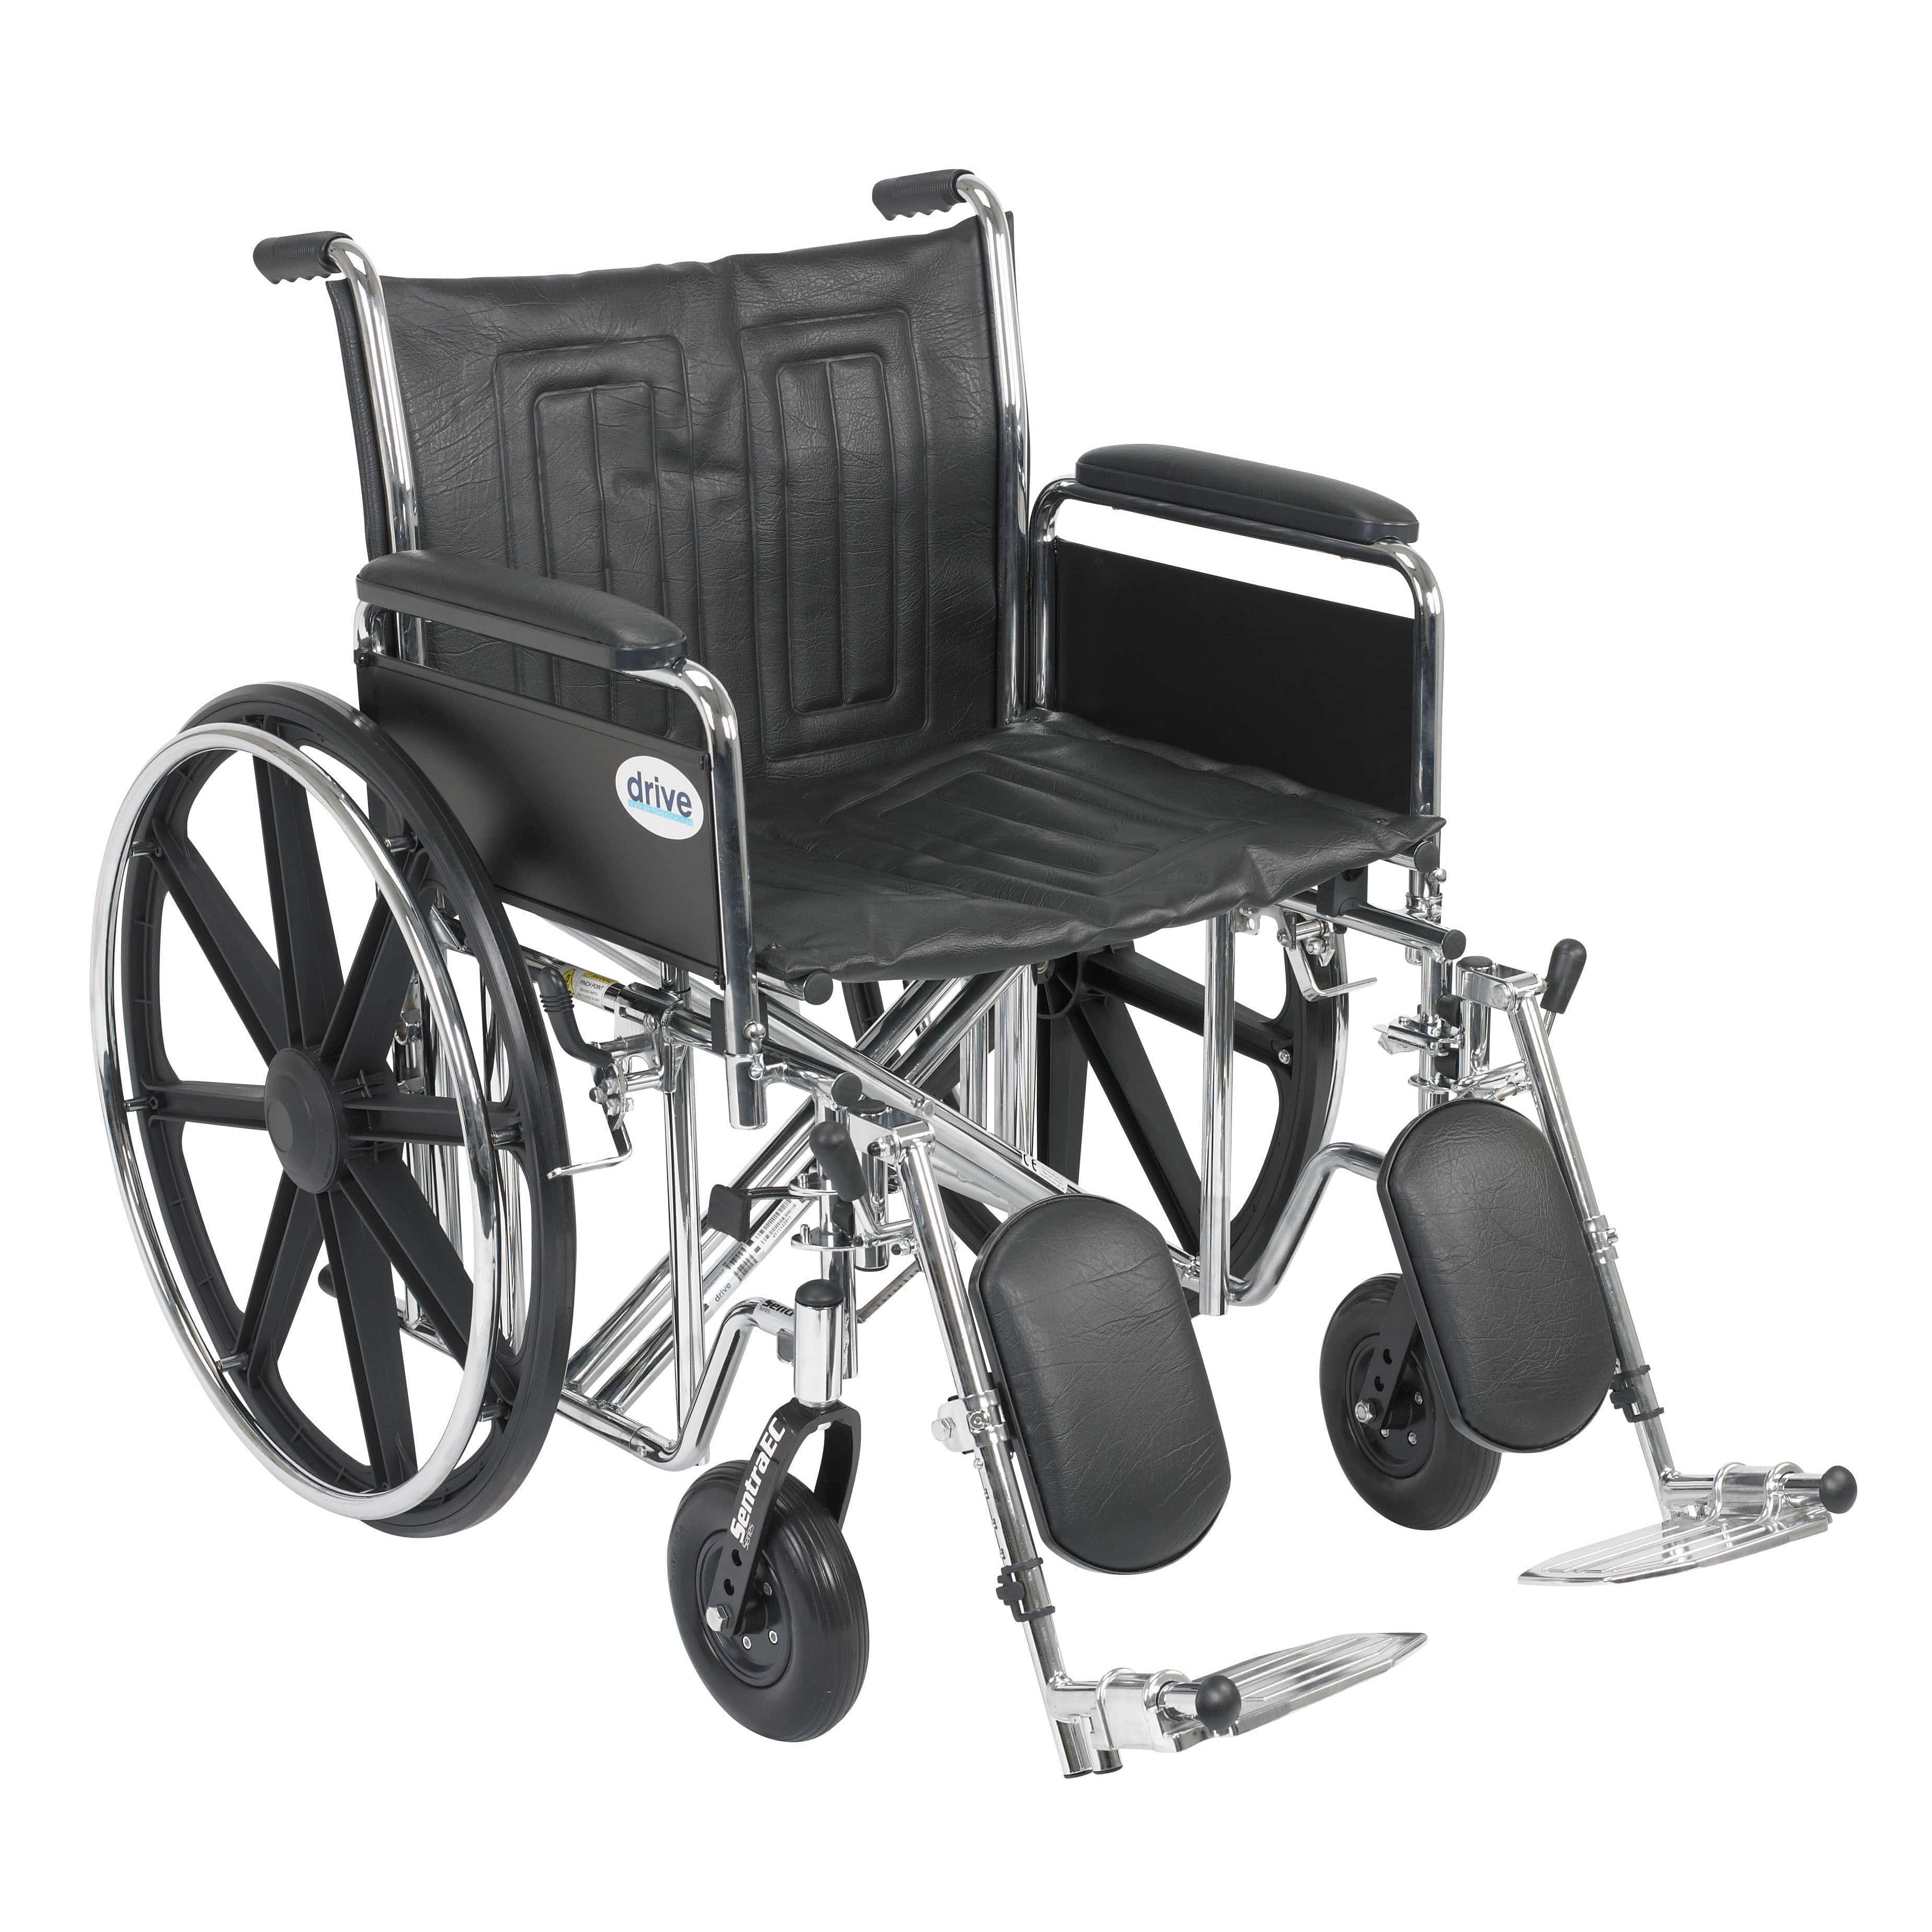 Drive Medical Wheelchairs Detachable Full Arms and Elevating Leg Rests / 22" Seat Drive Medical Sentra EC Heavy Duty Wheelchair